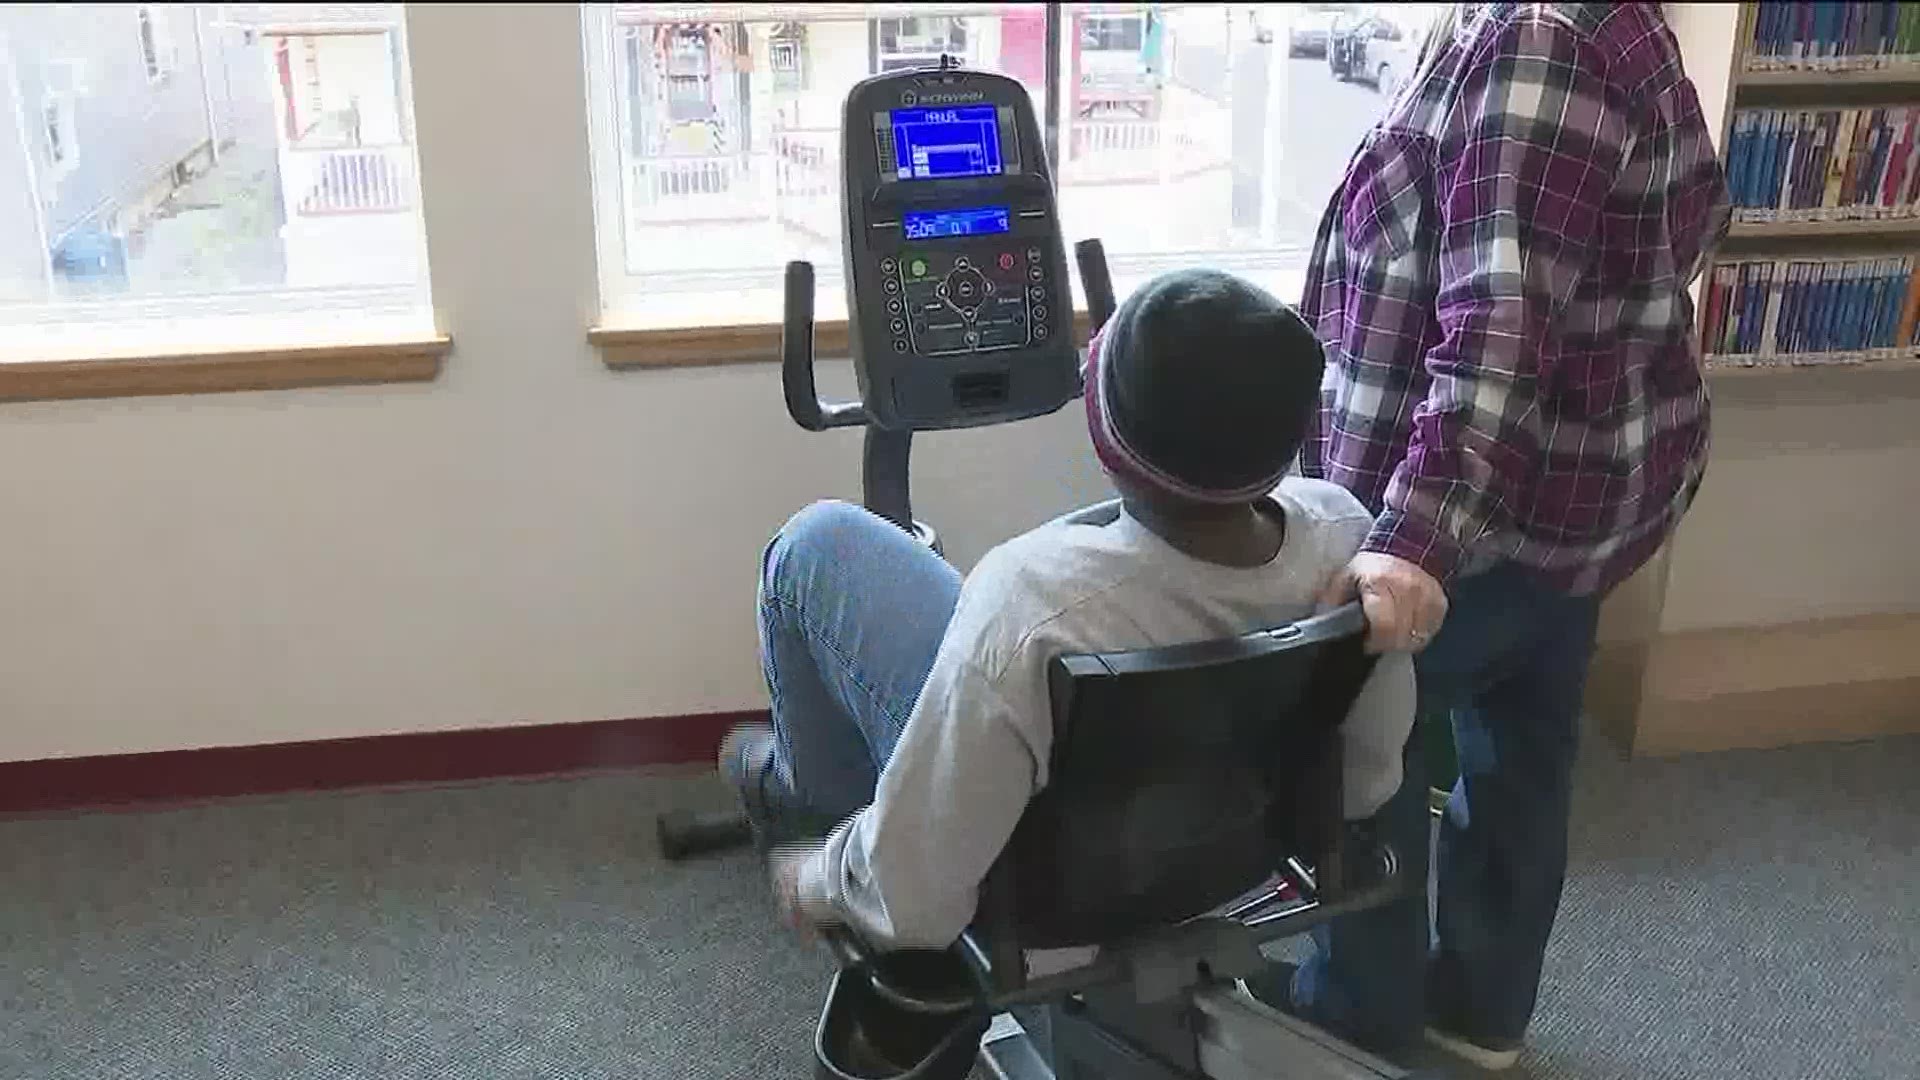 A library in central Pennsylvania is helping people pay off their overdue fines while encouraging fitness at the same time.